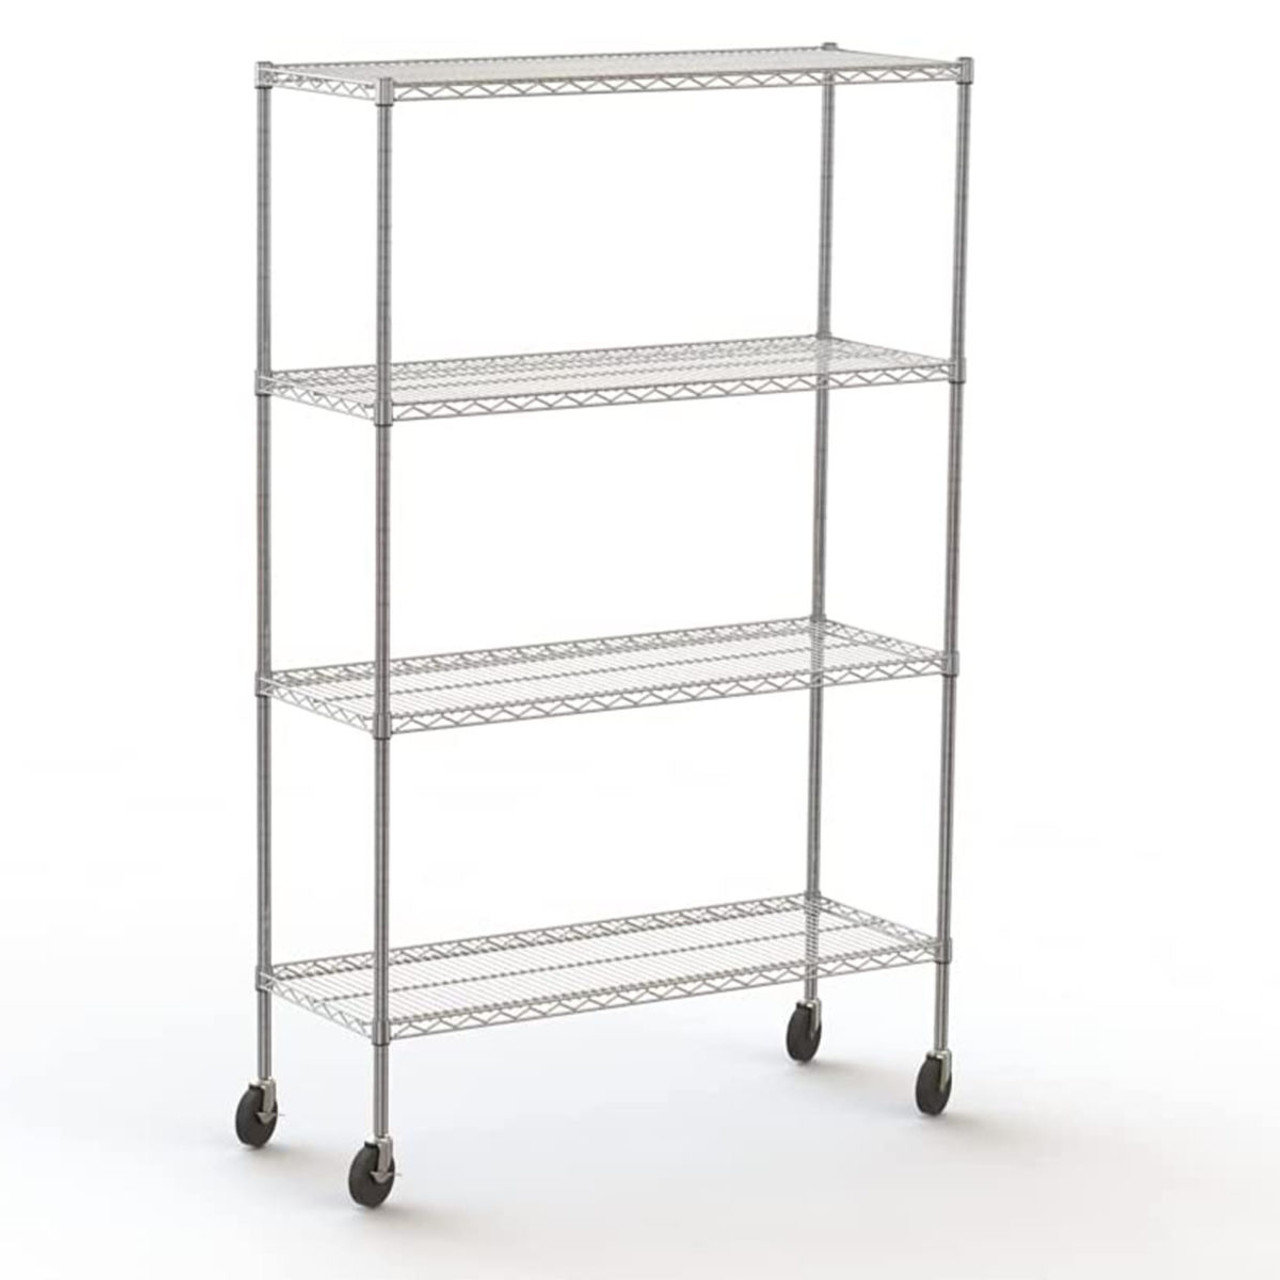 18″ x 48″ x 72″ 4-Tier Wire Shelving